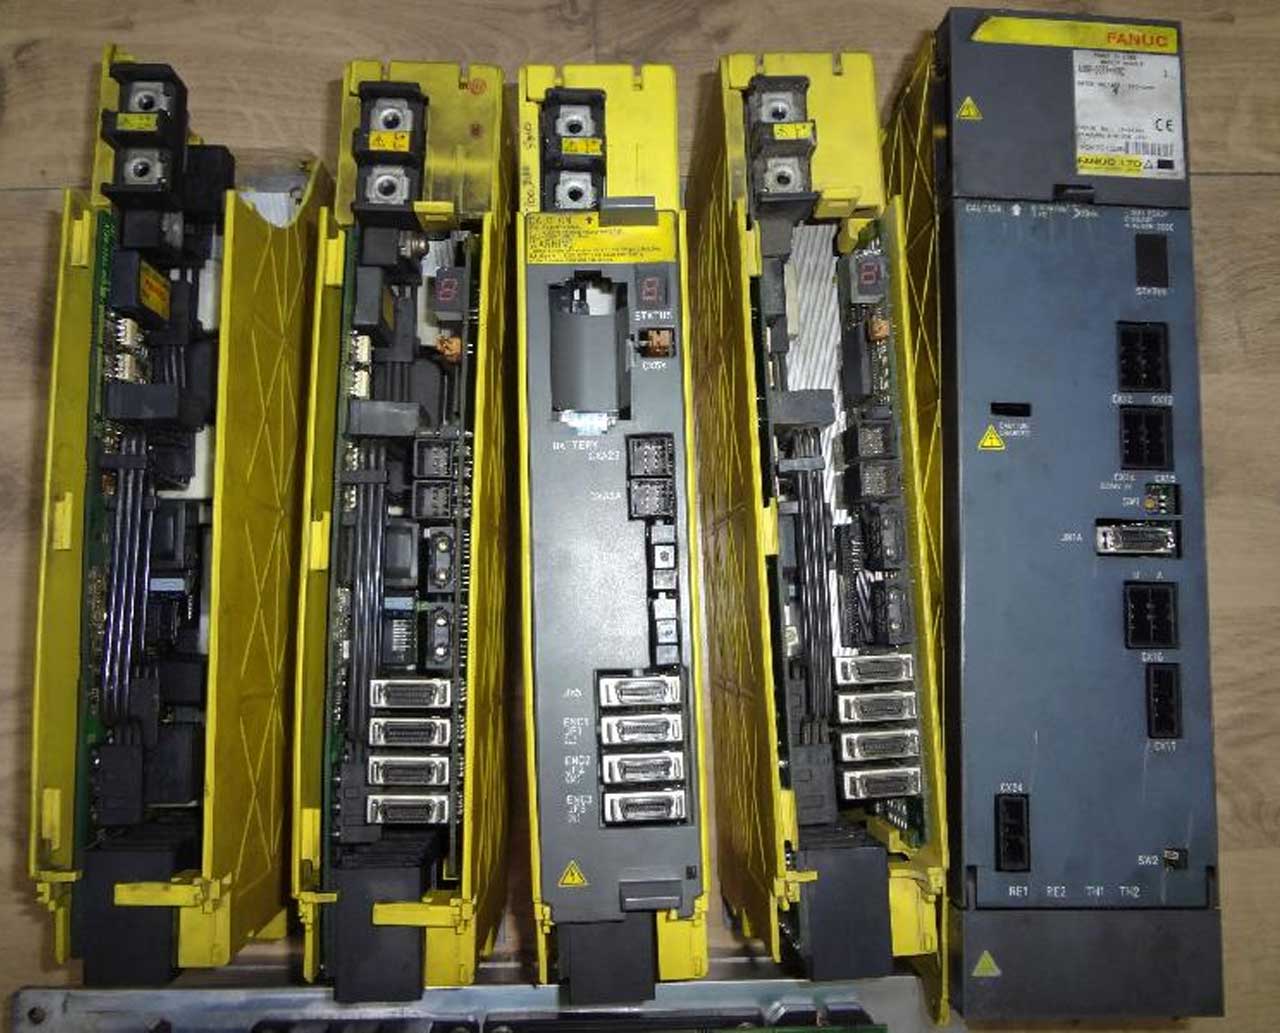 Used Fanuc Drive Suppliers and Dealers in Pune, Old, Second Hand and Refurbished Fanuc Drives in Pune | Puja Enterprises